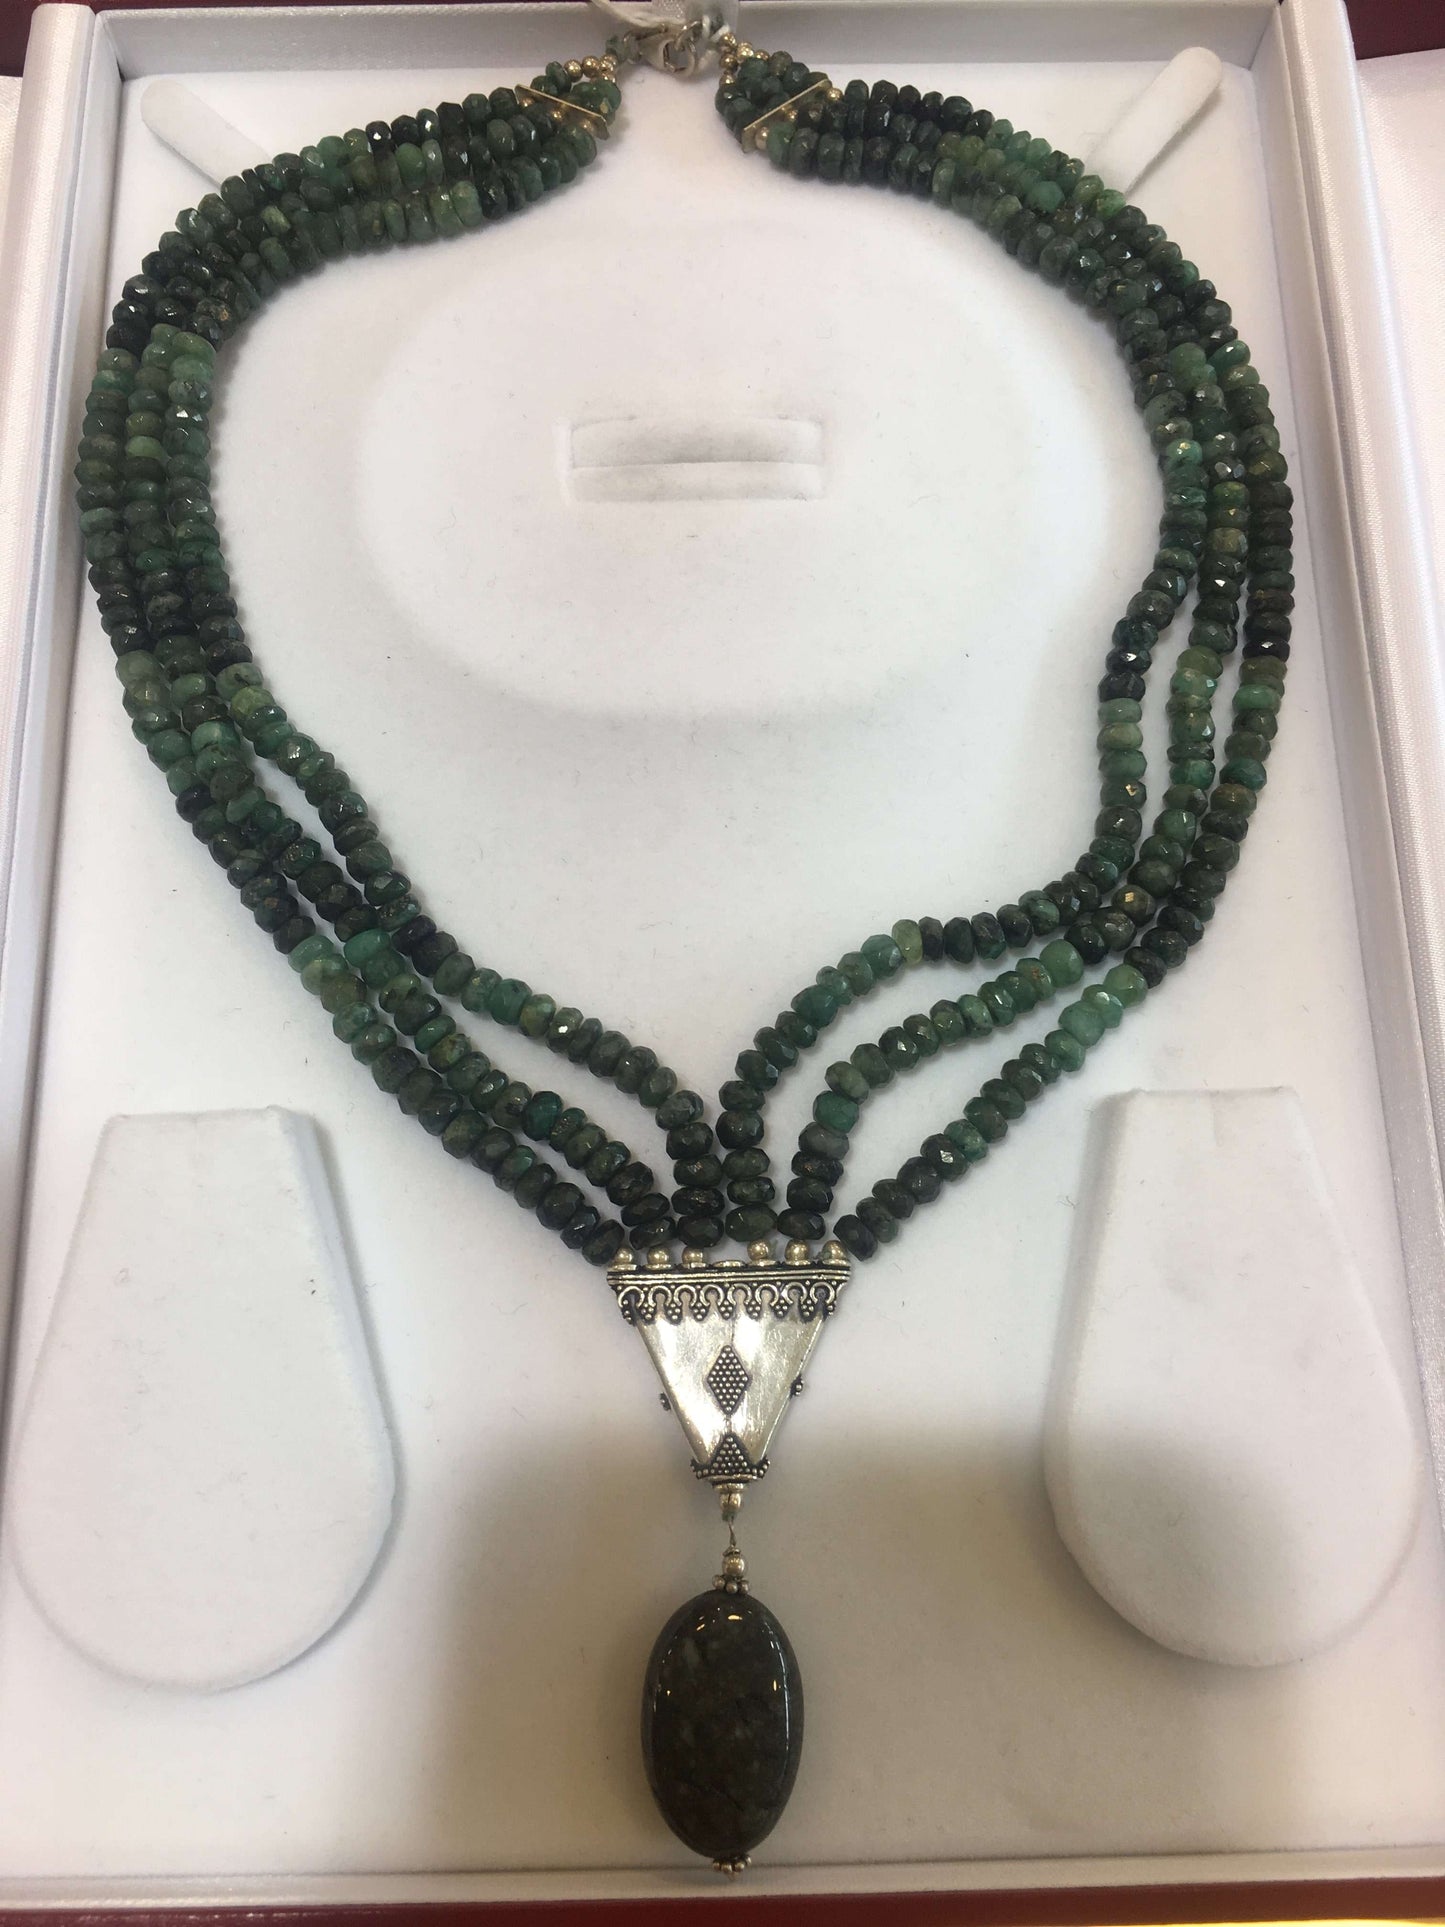 Emerald Beads Necklace with Sterling Silver